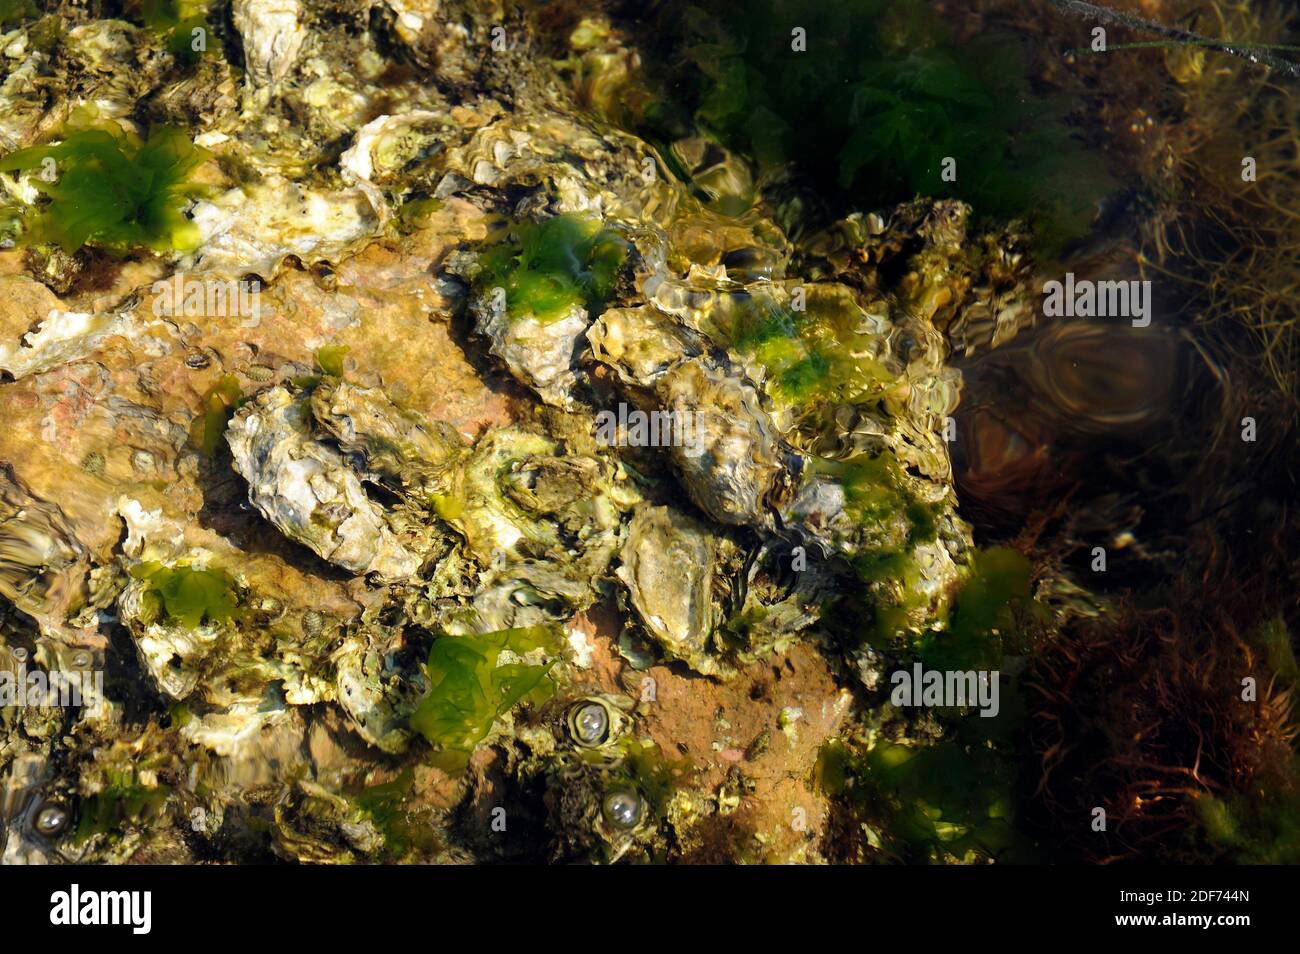 Japanese oyster or Pacific oyster (Crassostrea gigas or Magallana gigas). Thau, France. Stock Photo